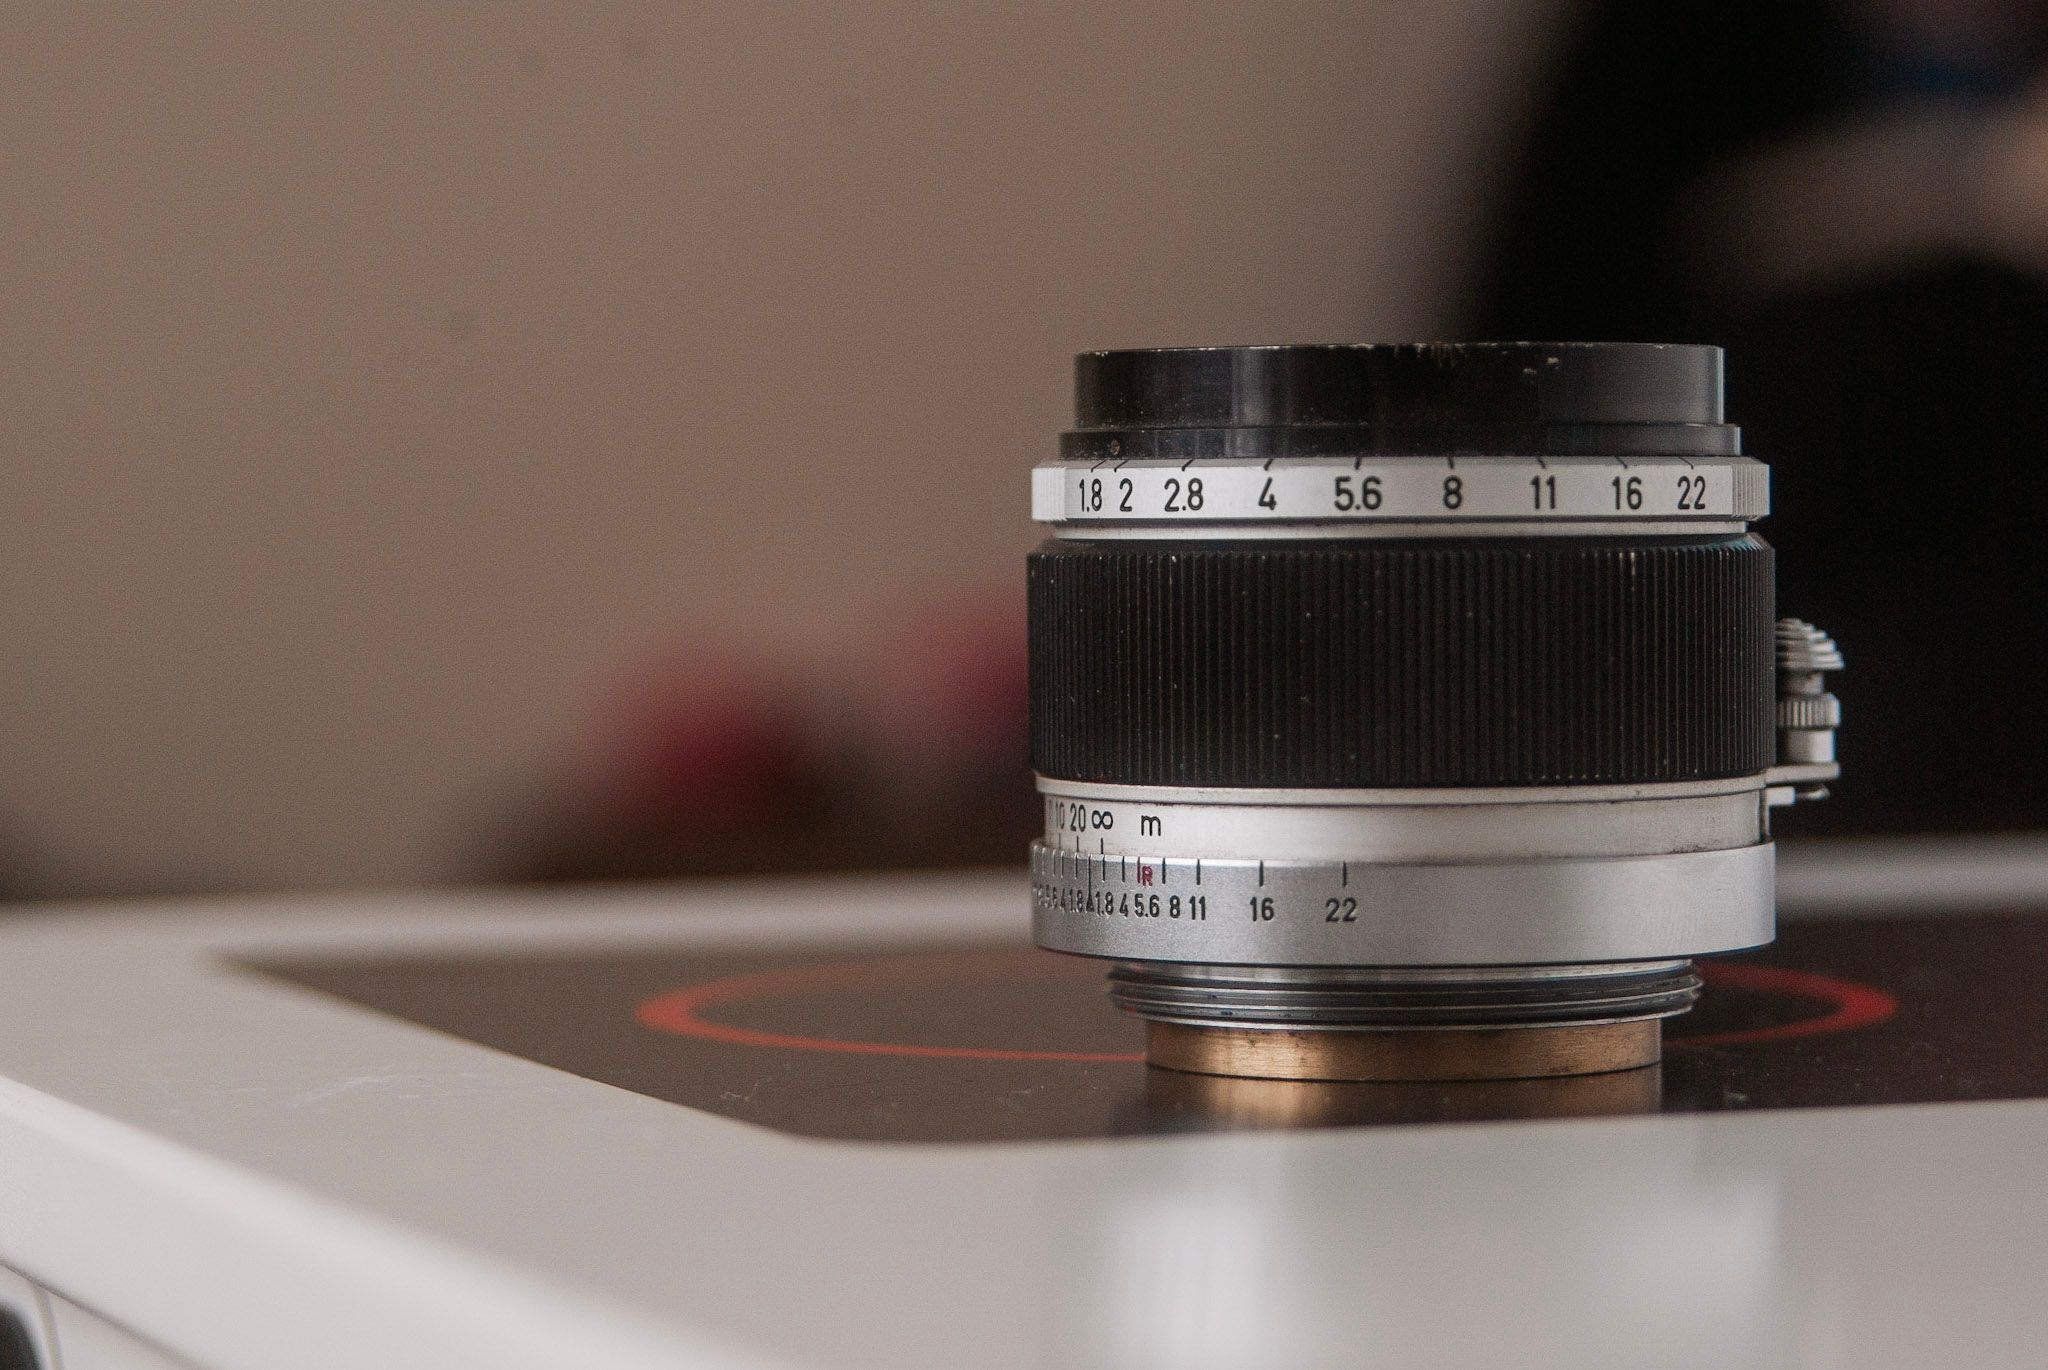 Canon 50mm f1.8 LTM Lens Review - 50mmF2